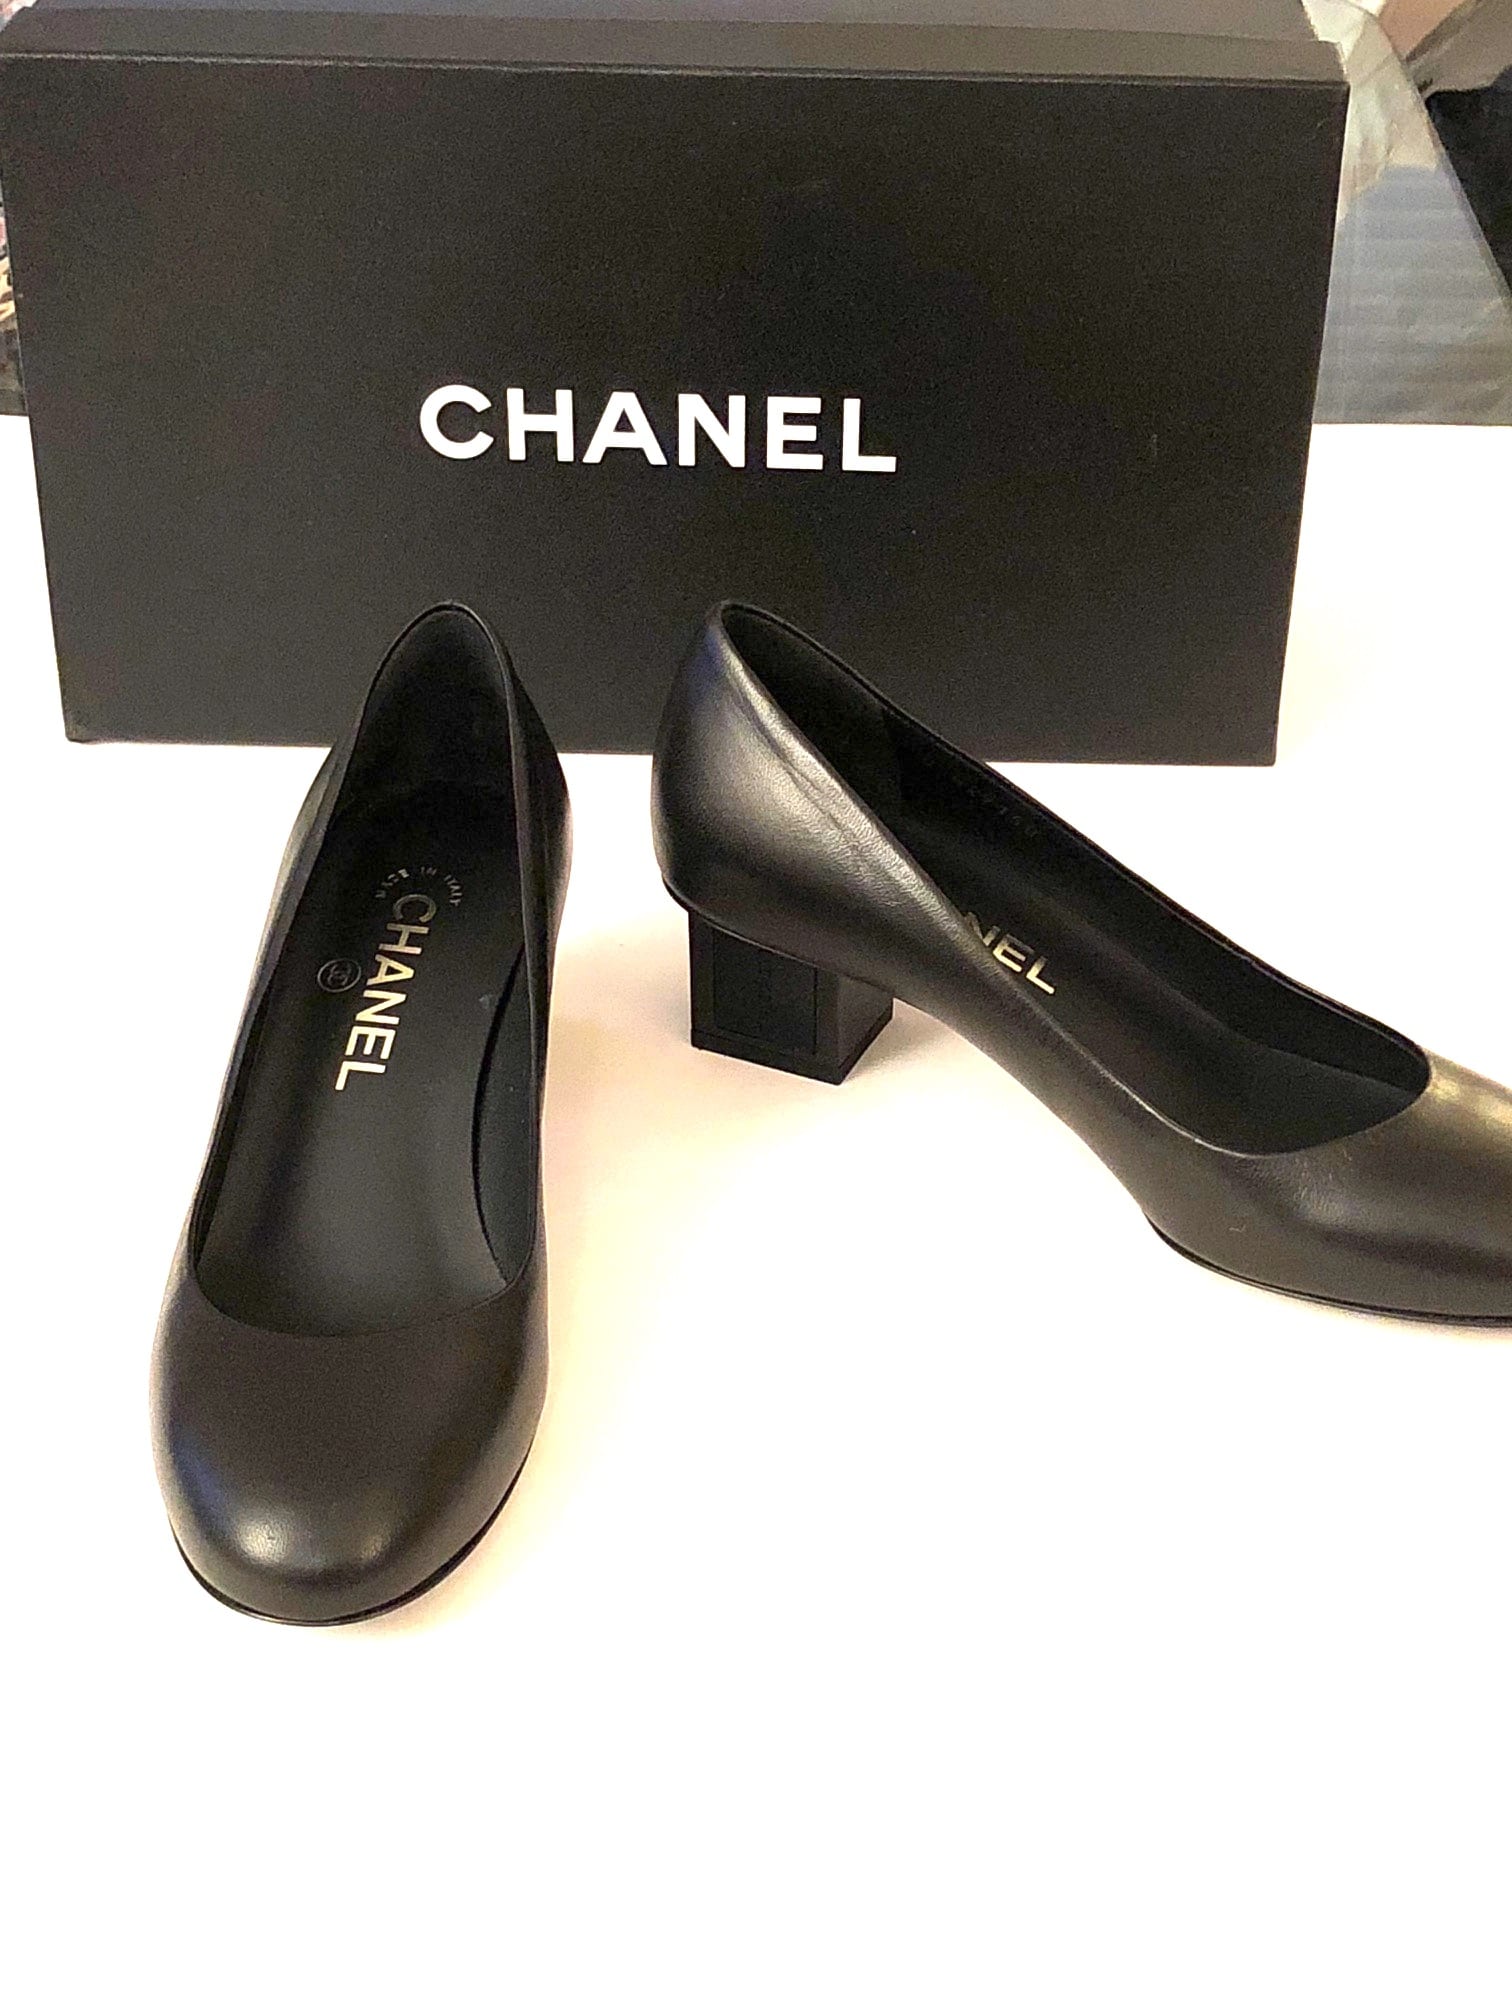 CHANEL, BLACK LEATHER PUMP WITH SQUARE HEEL  NEW IN BOX-SIZE-37, LOVE!!!!!  - Hampton Gems